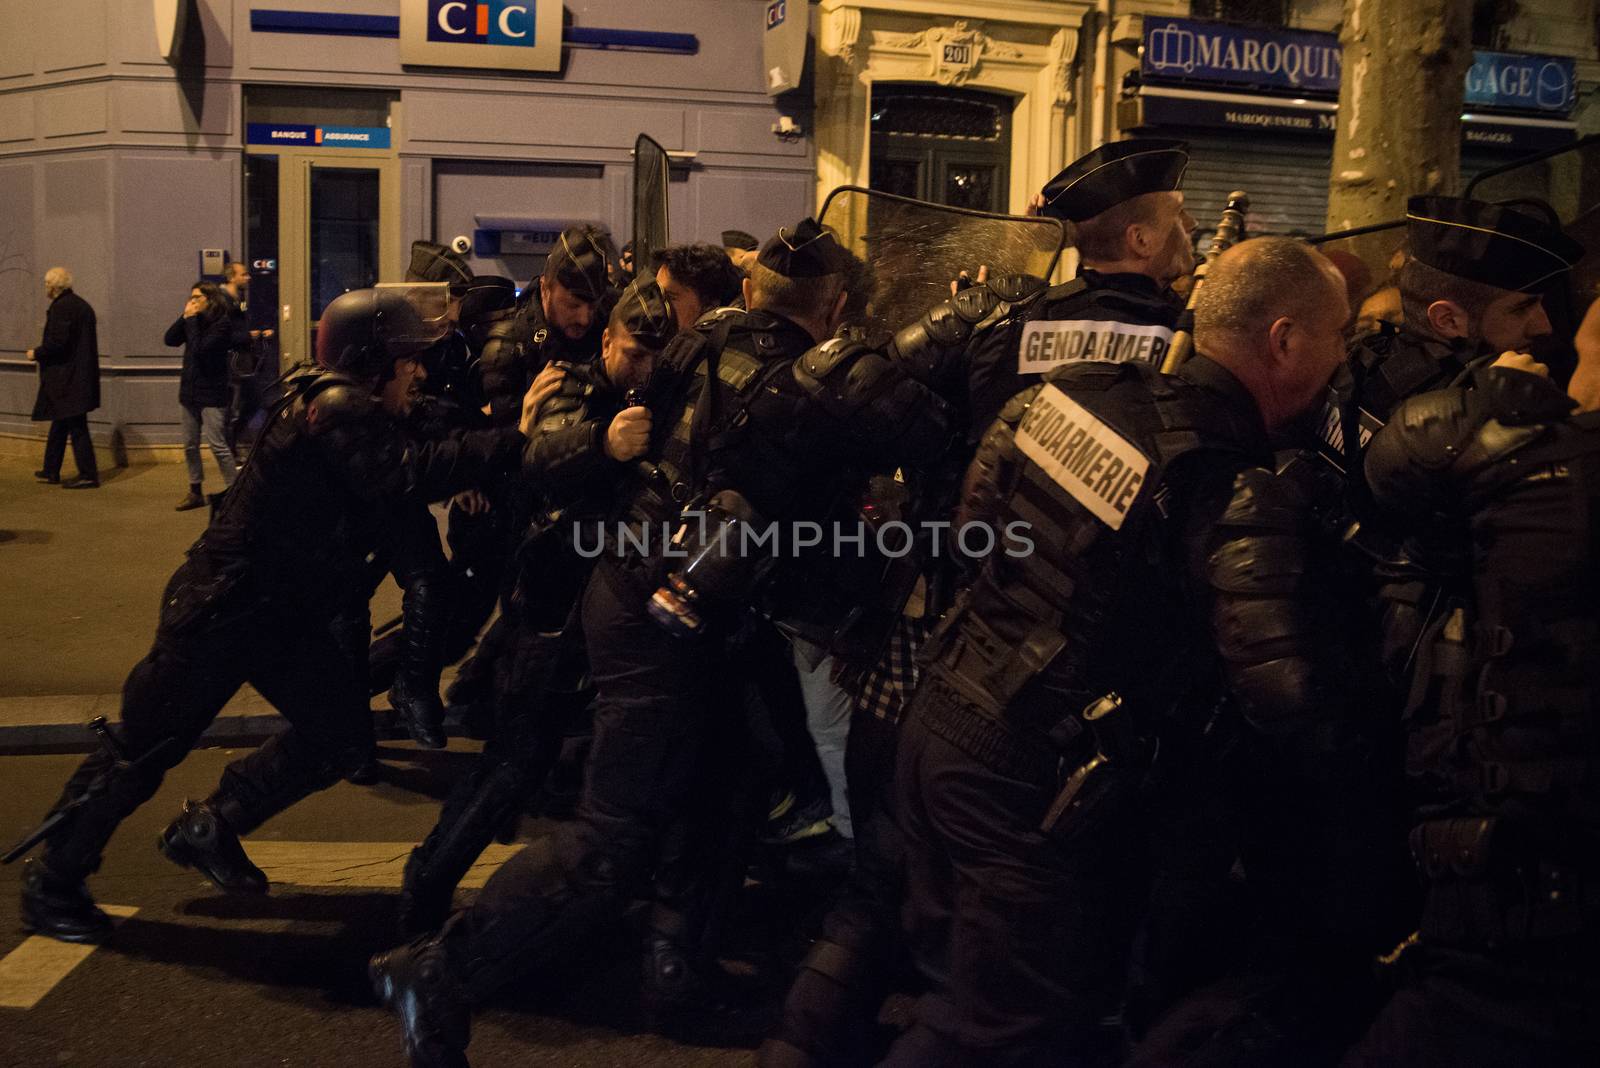 FRANCE, Paris: French police officers face protesters during a night demonstration in front of a police station in the 2nd arrondissement of Paris, on April 12, 2016. Protesters claim the release of a student arrested earlier in the day. 